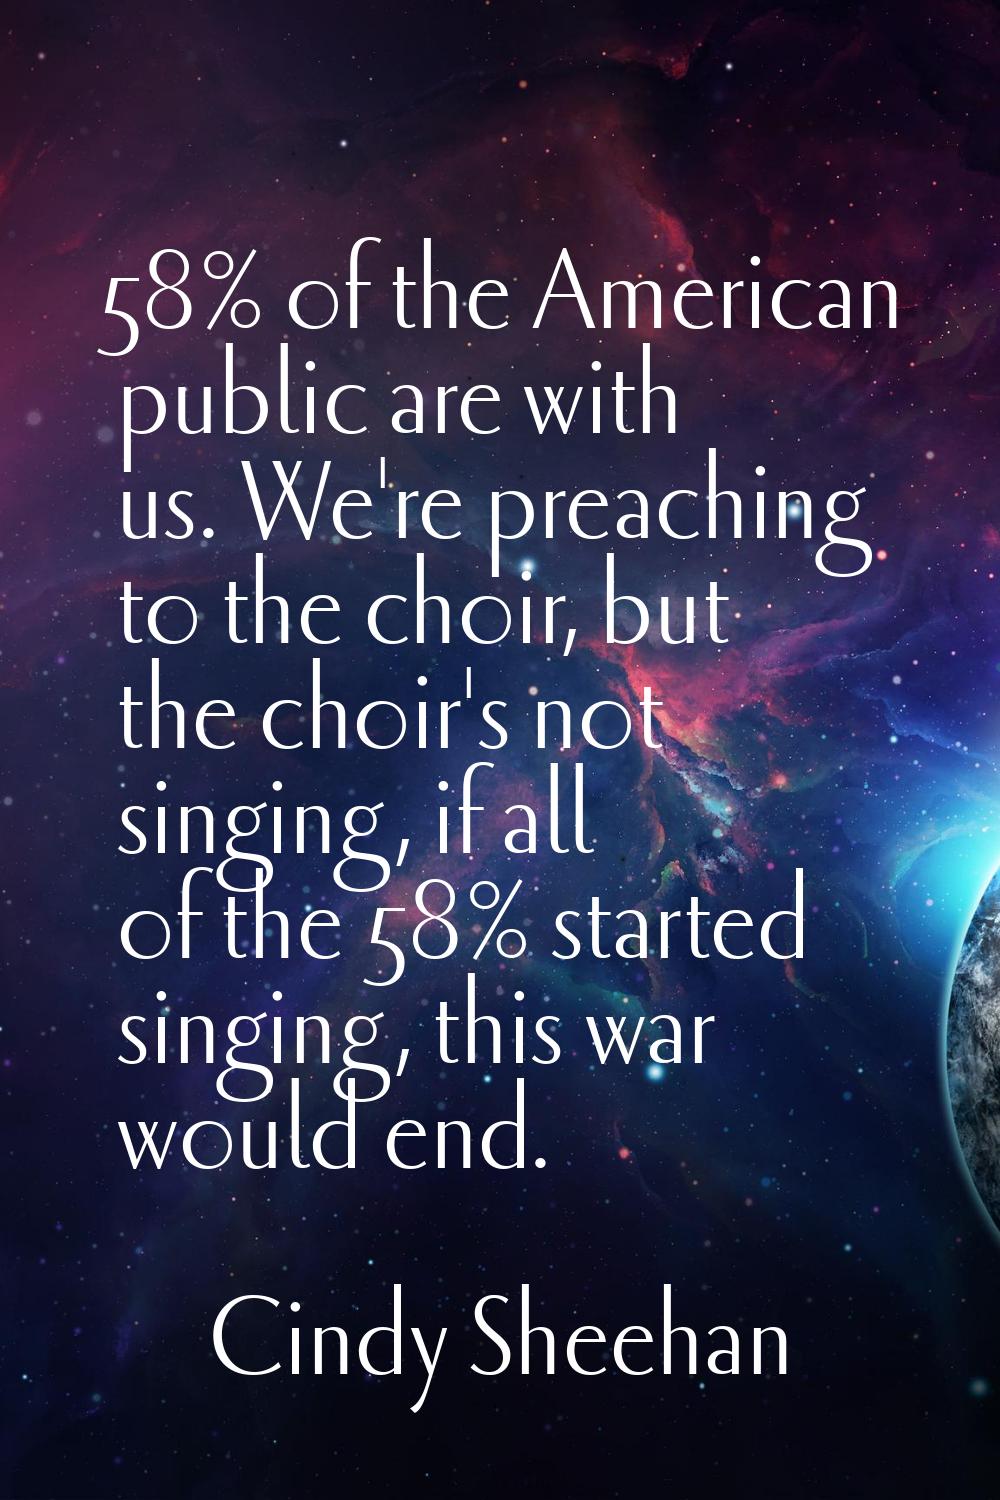 58% of the American public are with us. We're preaching to the choir, but the choir's not singing, 